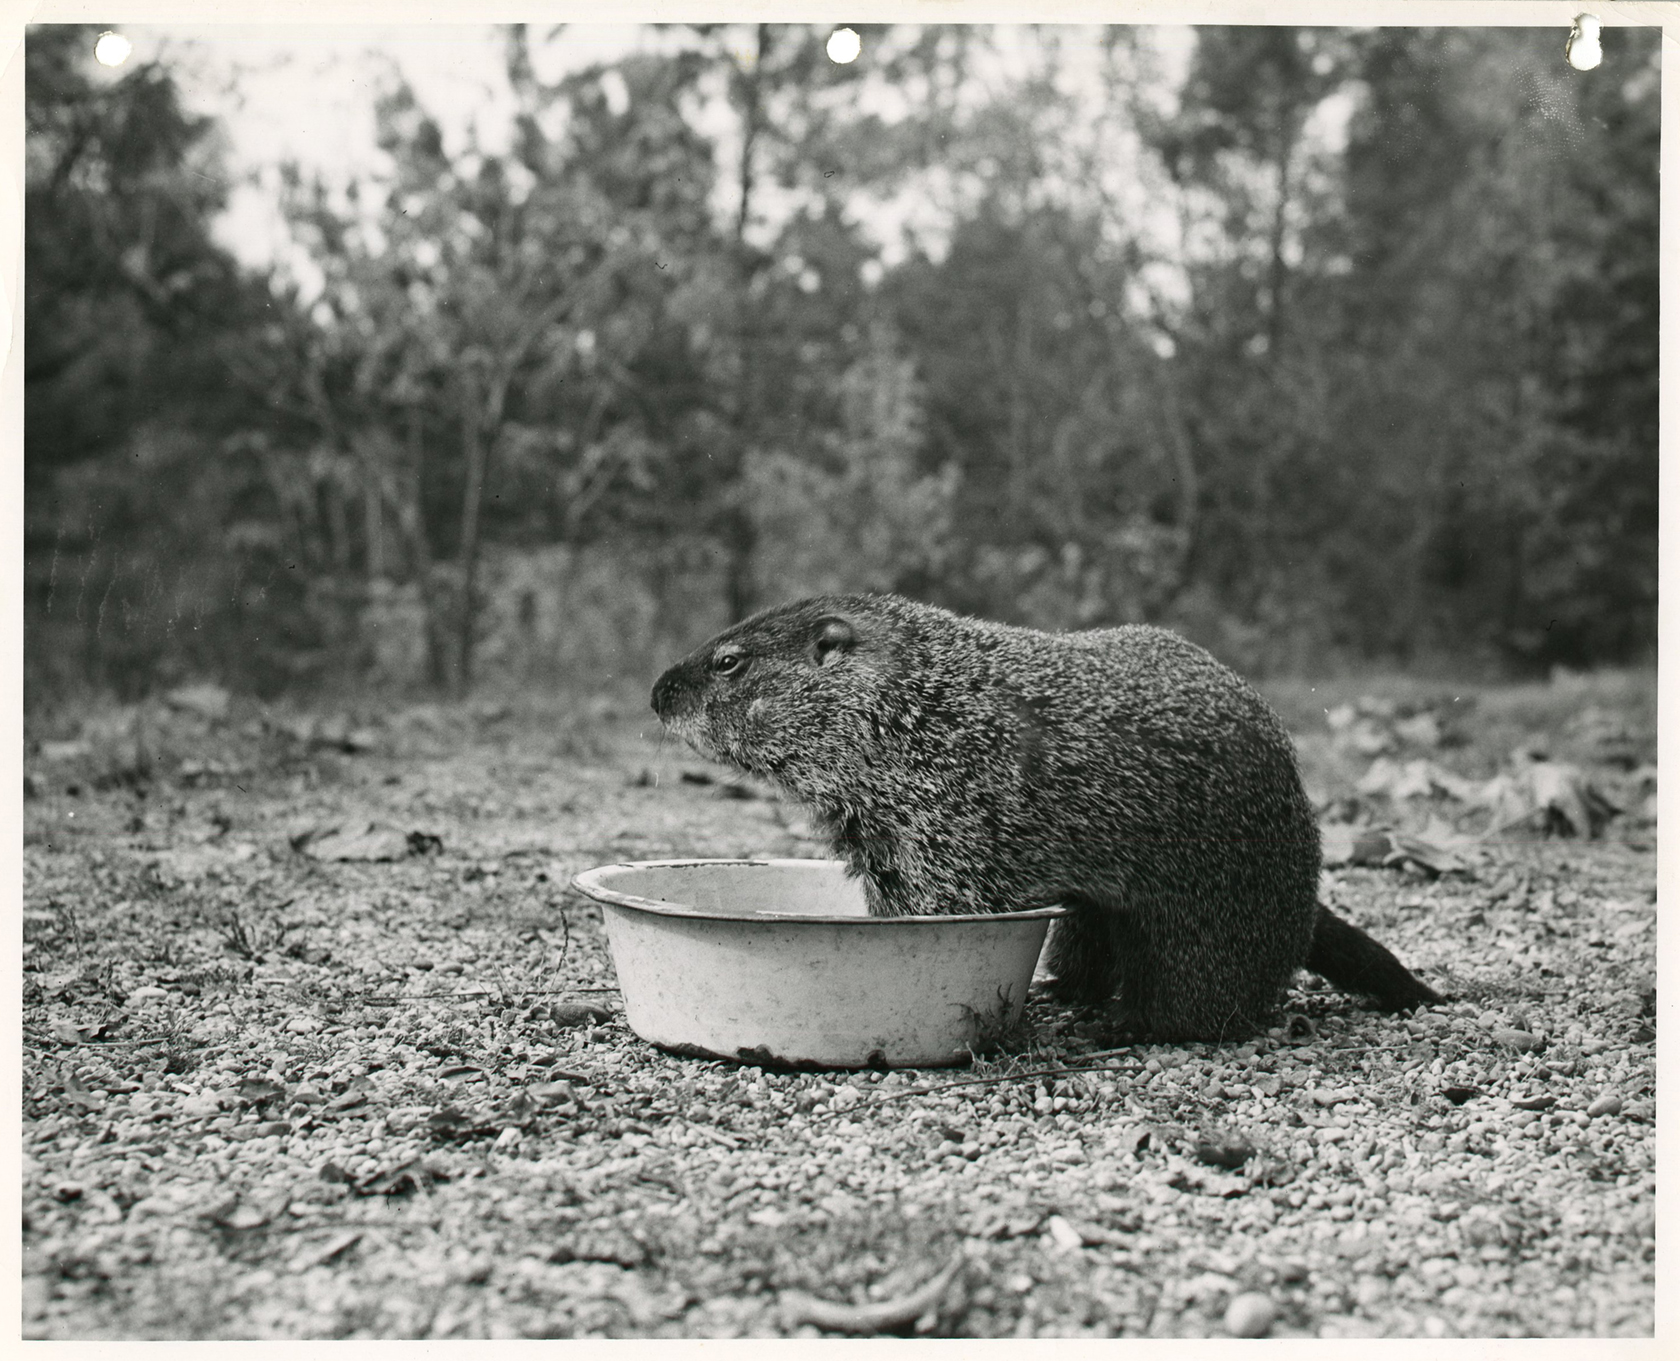 Black and white photograph of a groundhog sitting in a pan